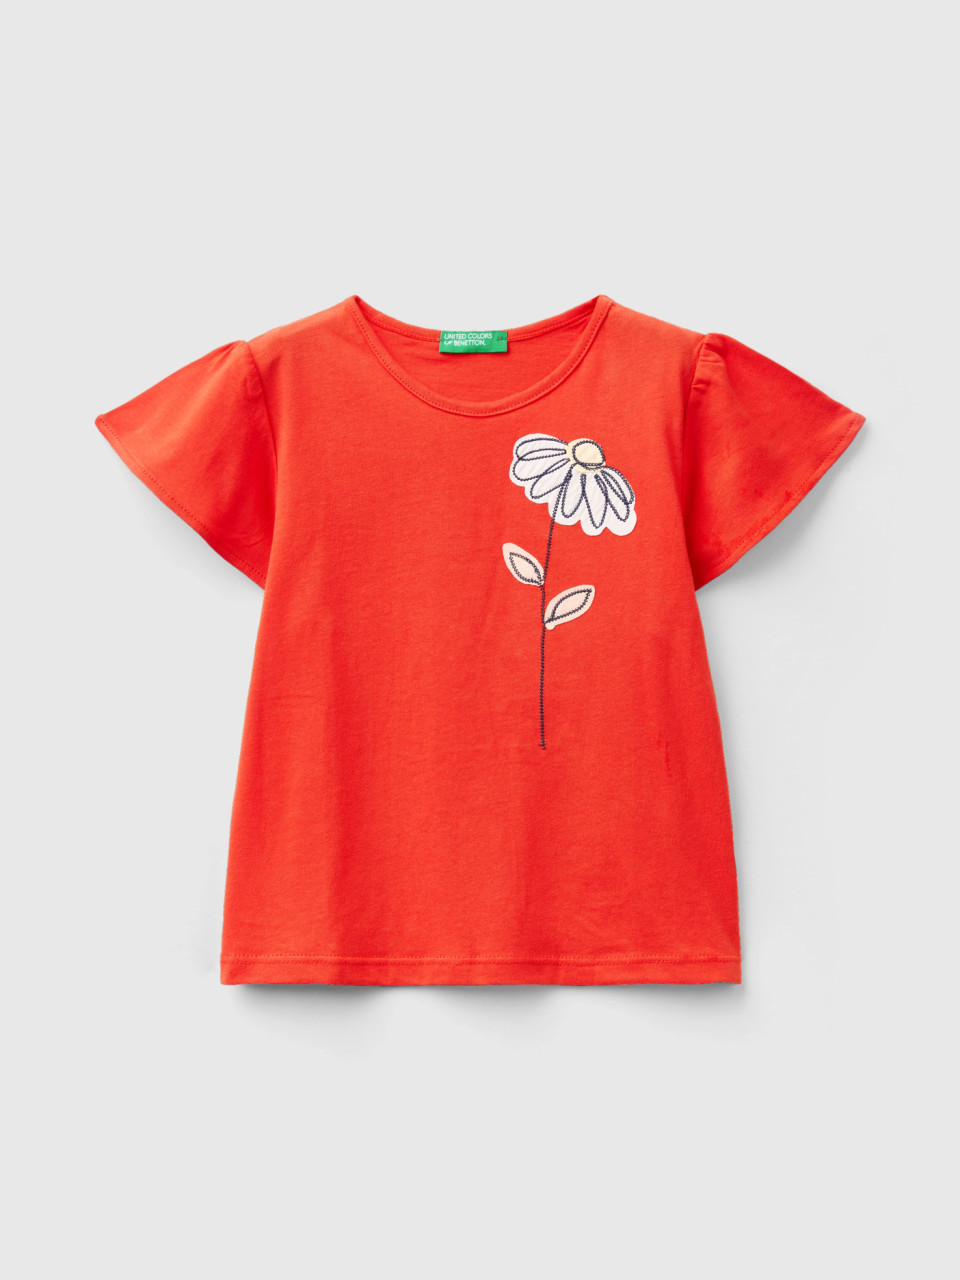 Benetton, T-shirt With Floral Embroidery, Red, Kids